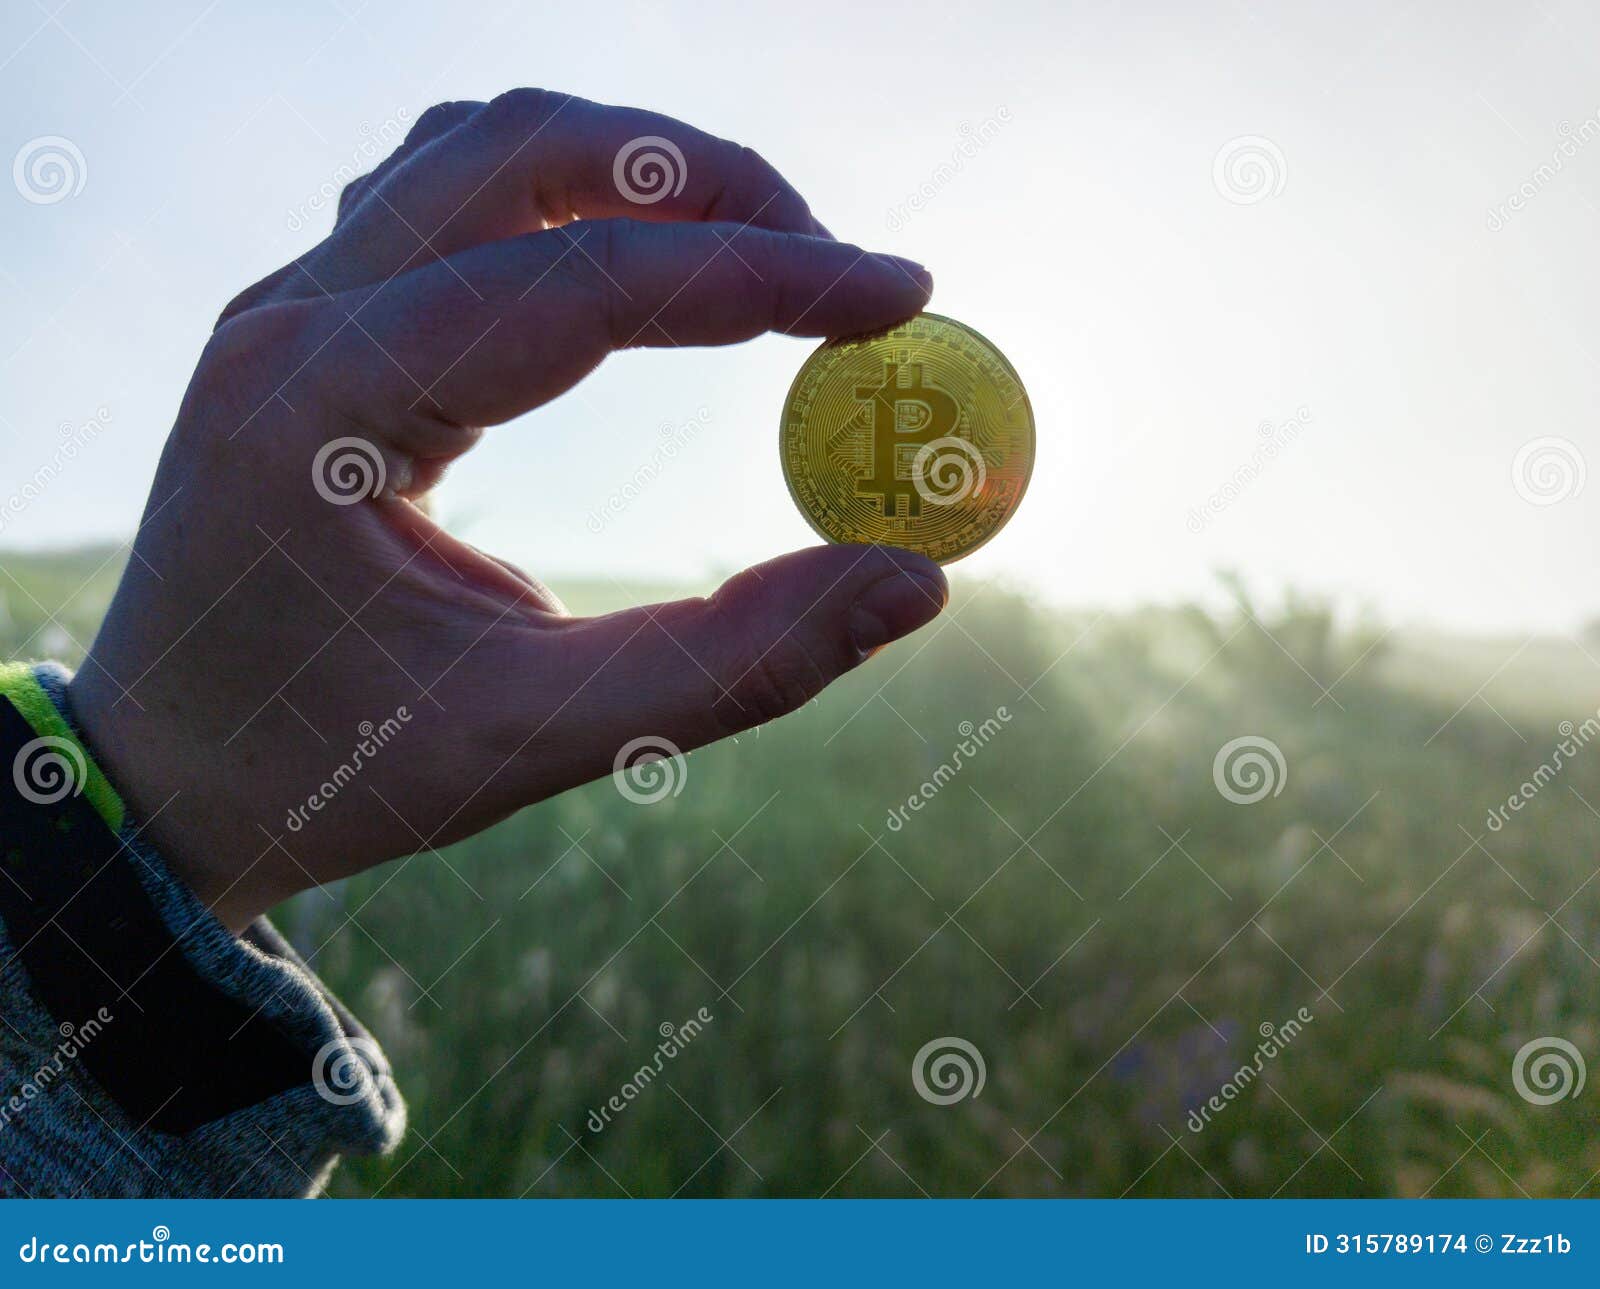 white human hand holding a bitcoin shiner on a morning grassy meadow background